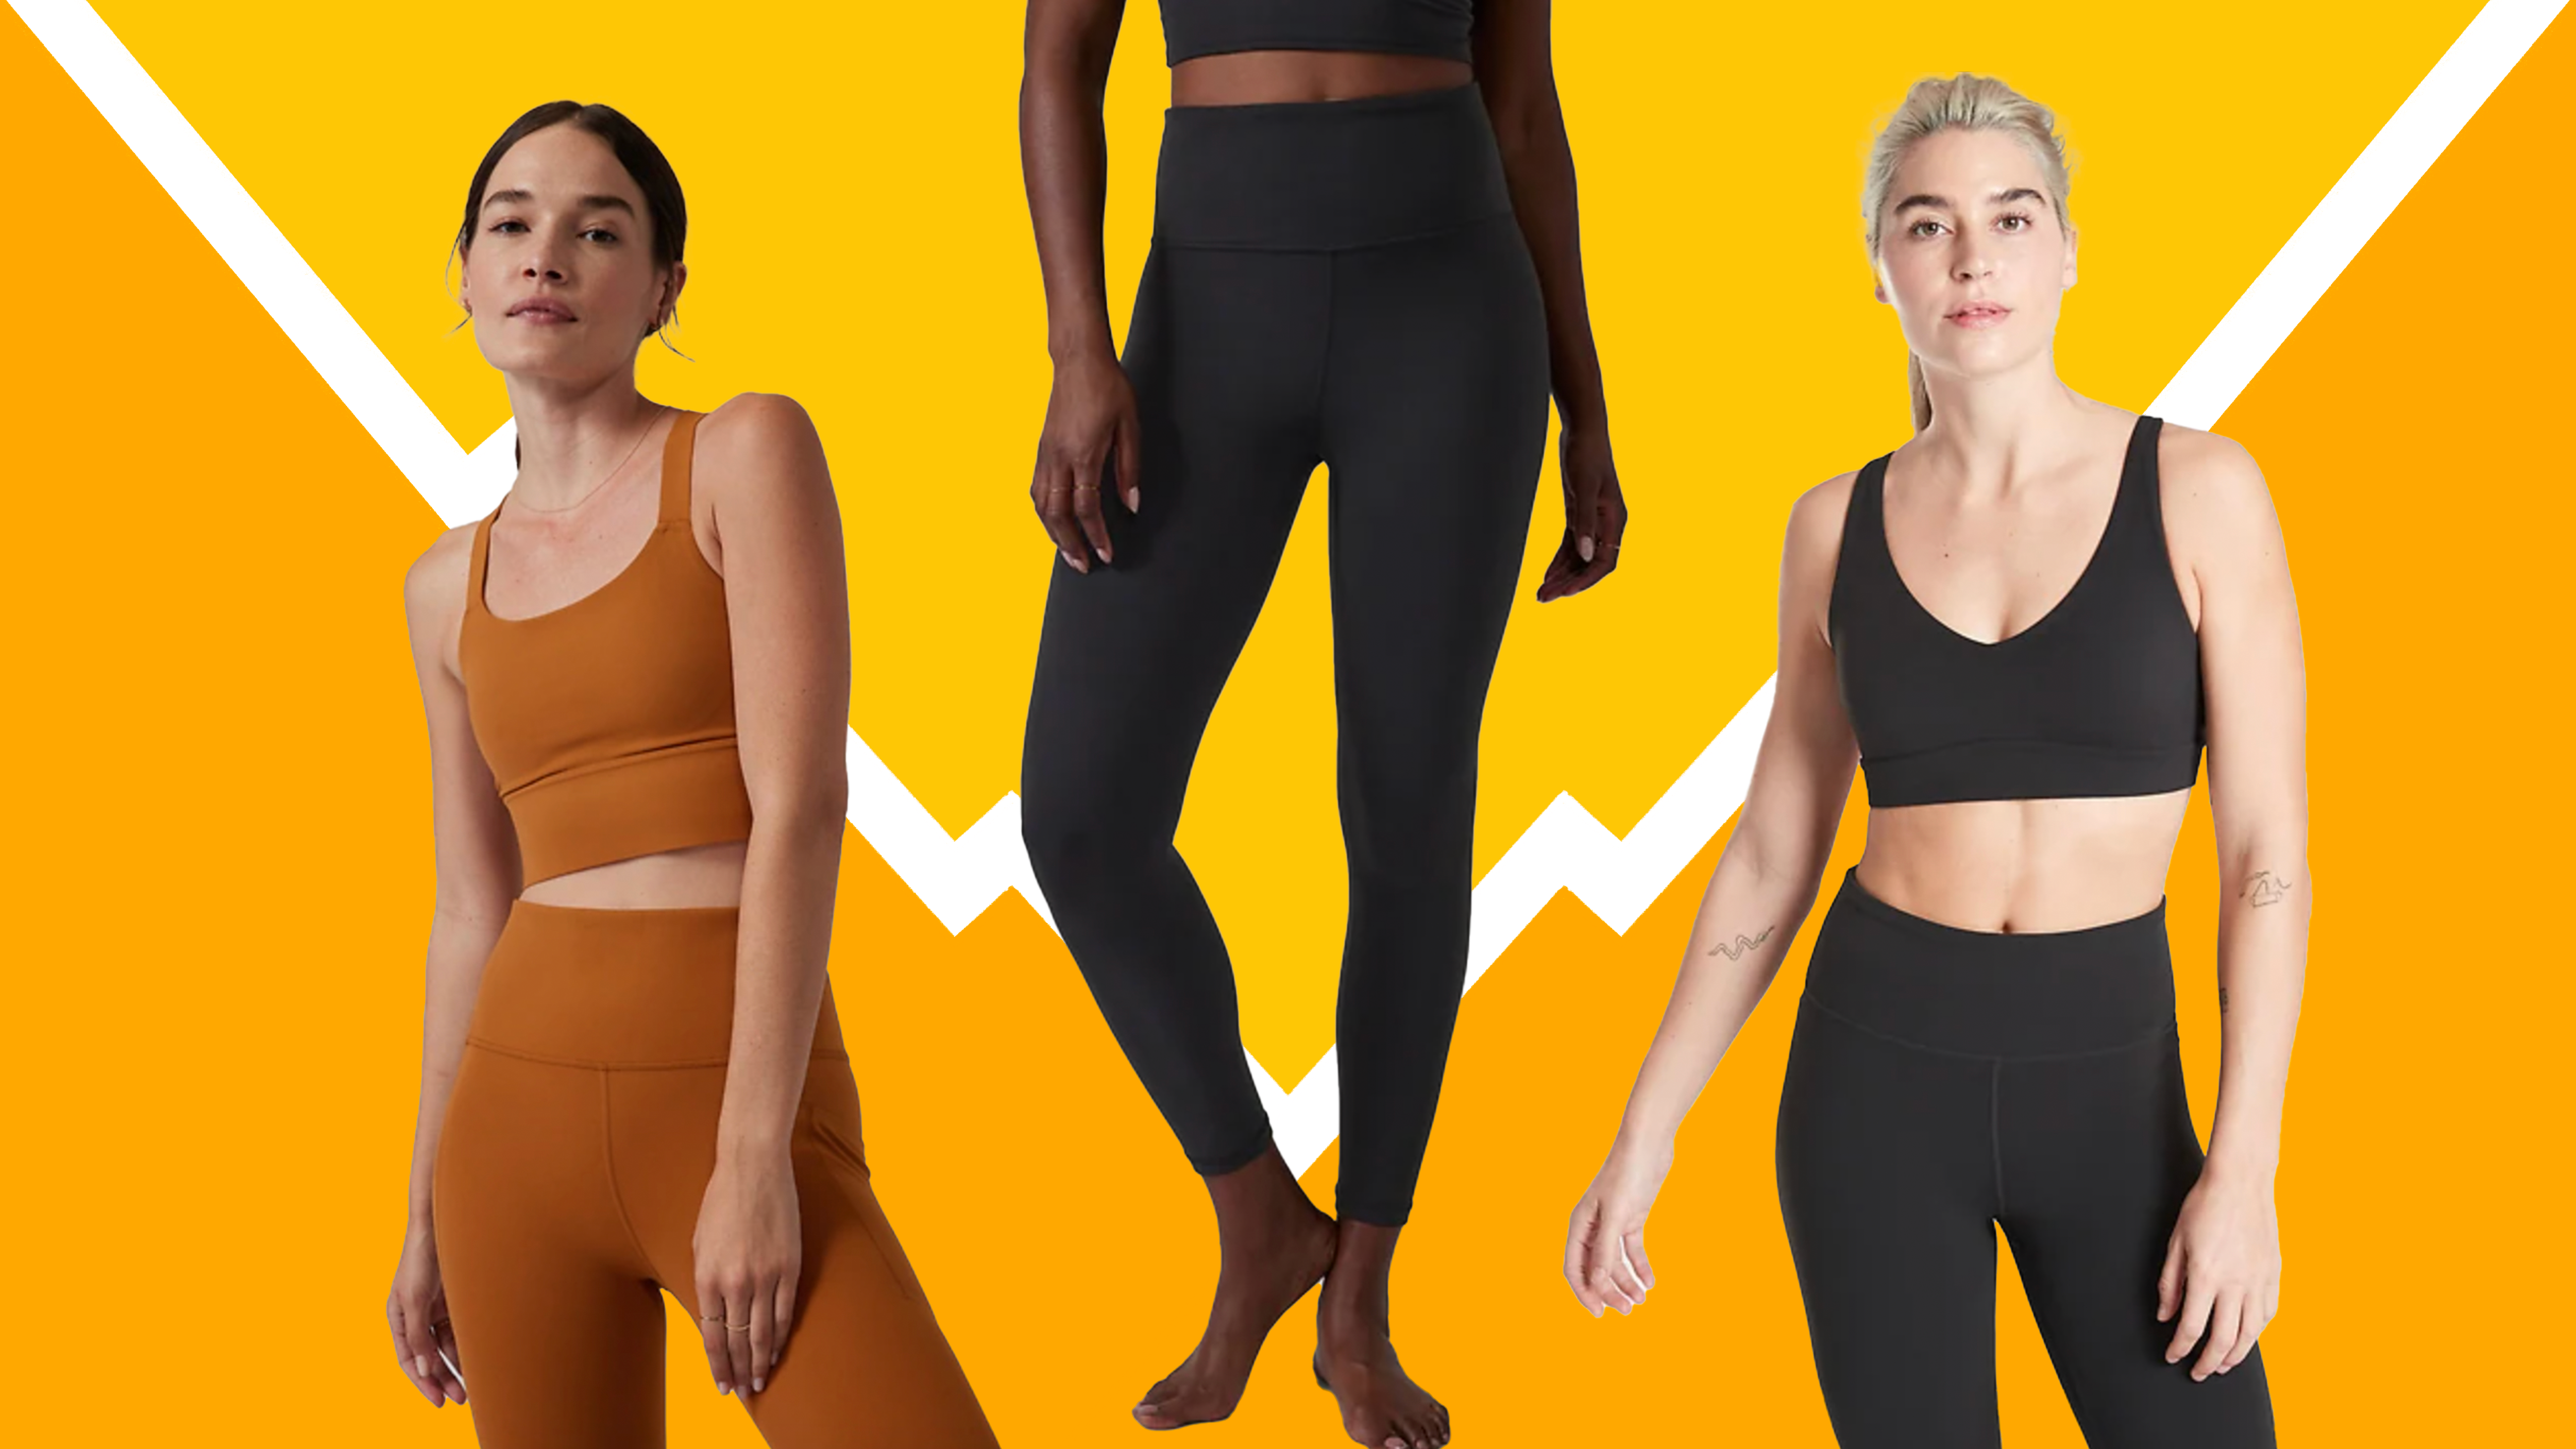 Save on leggings, sports bras and more during the Athleta Black Friday sale